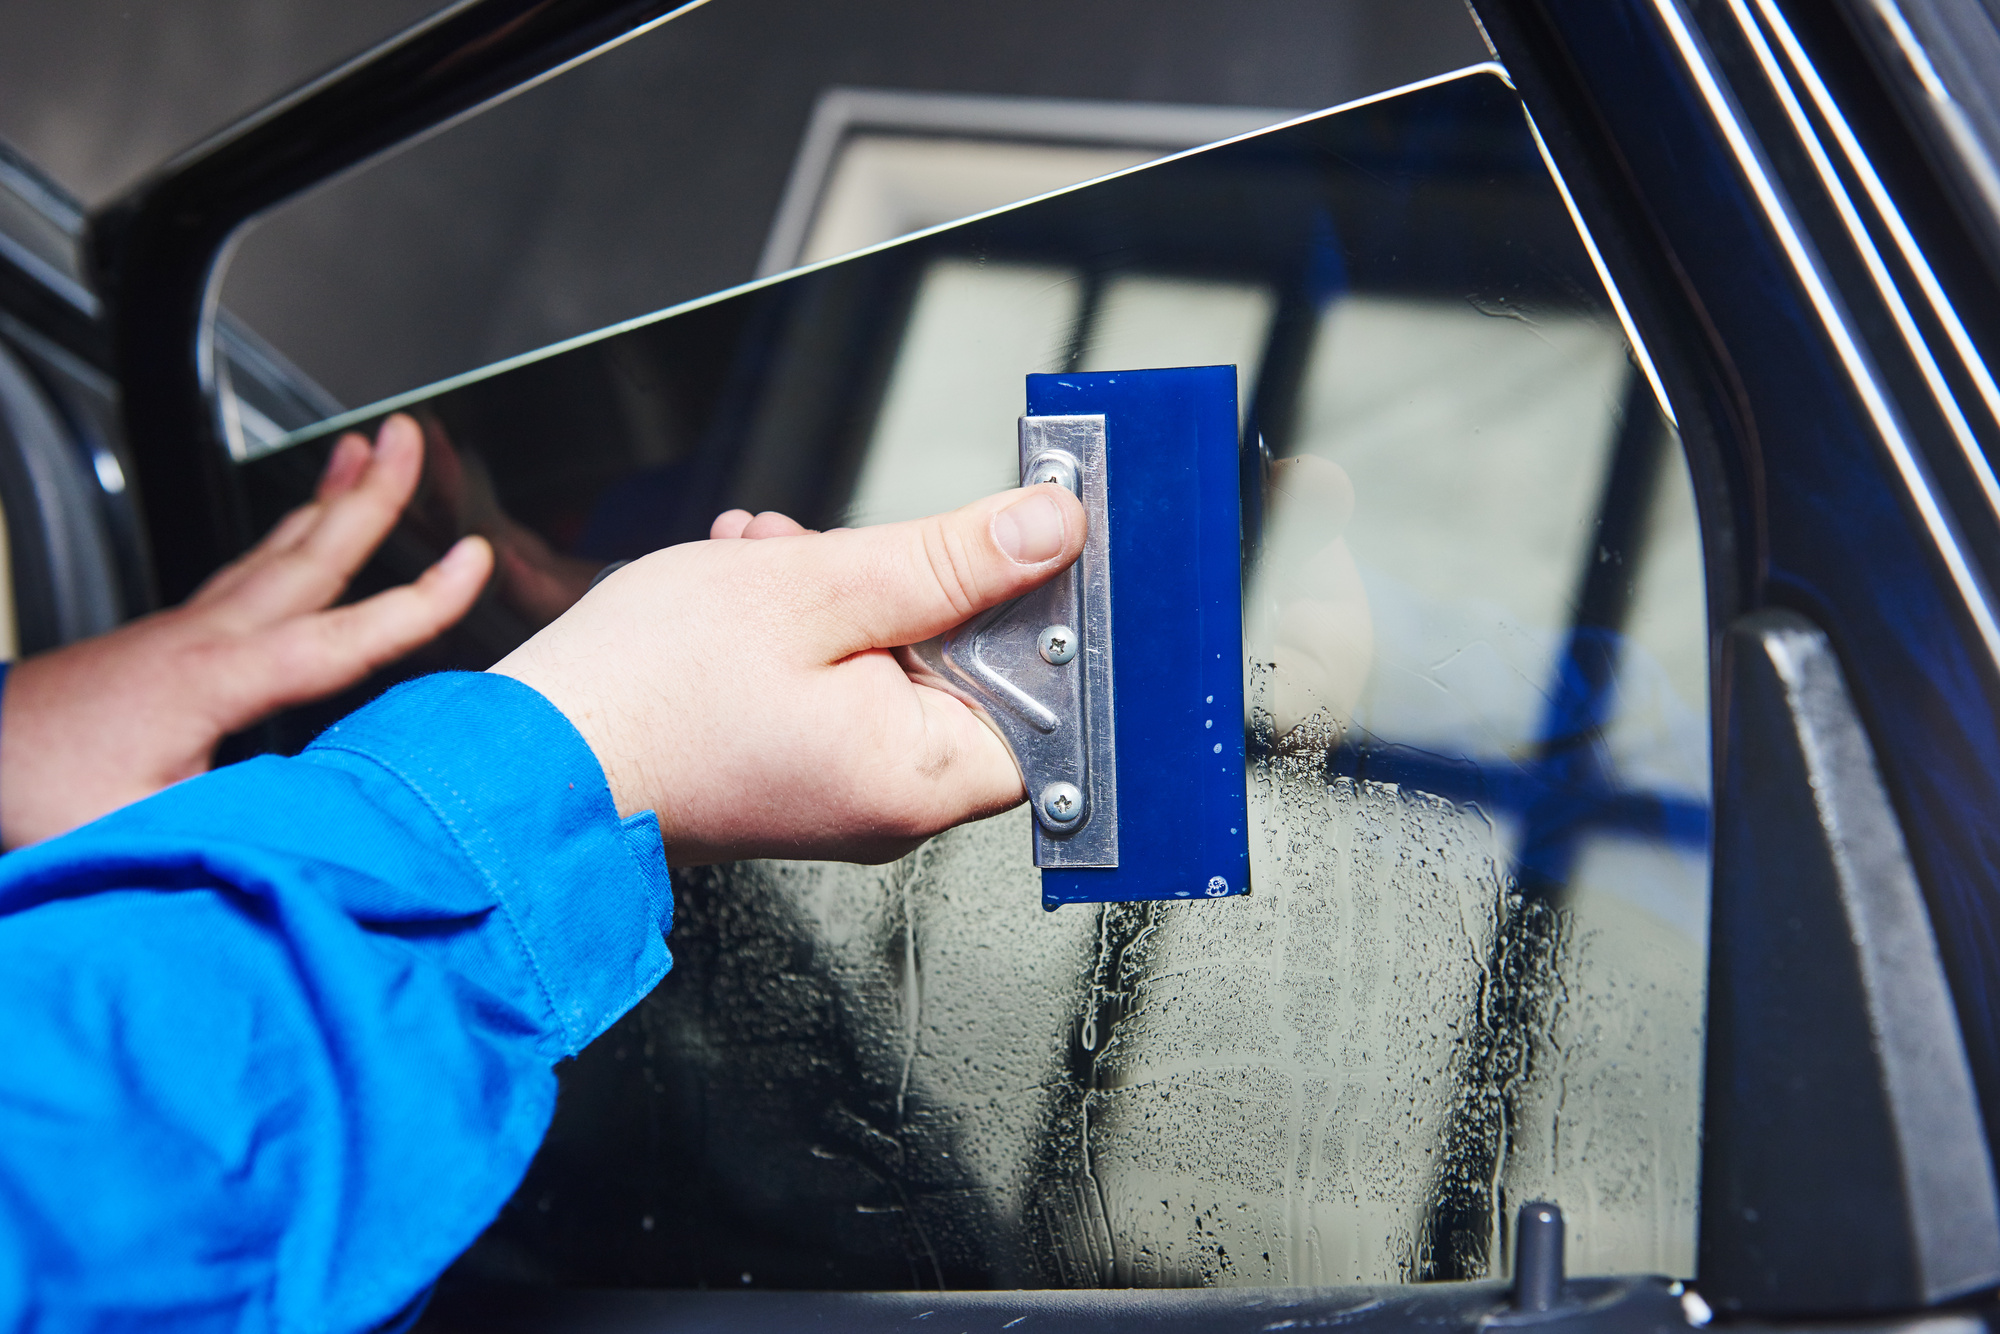 Finding the right professionals to tint your car's windows requires knowing your options. Here are tips to selecting window tinting companies for car owners.